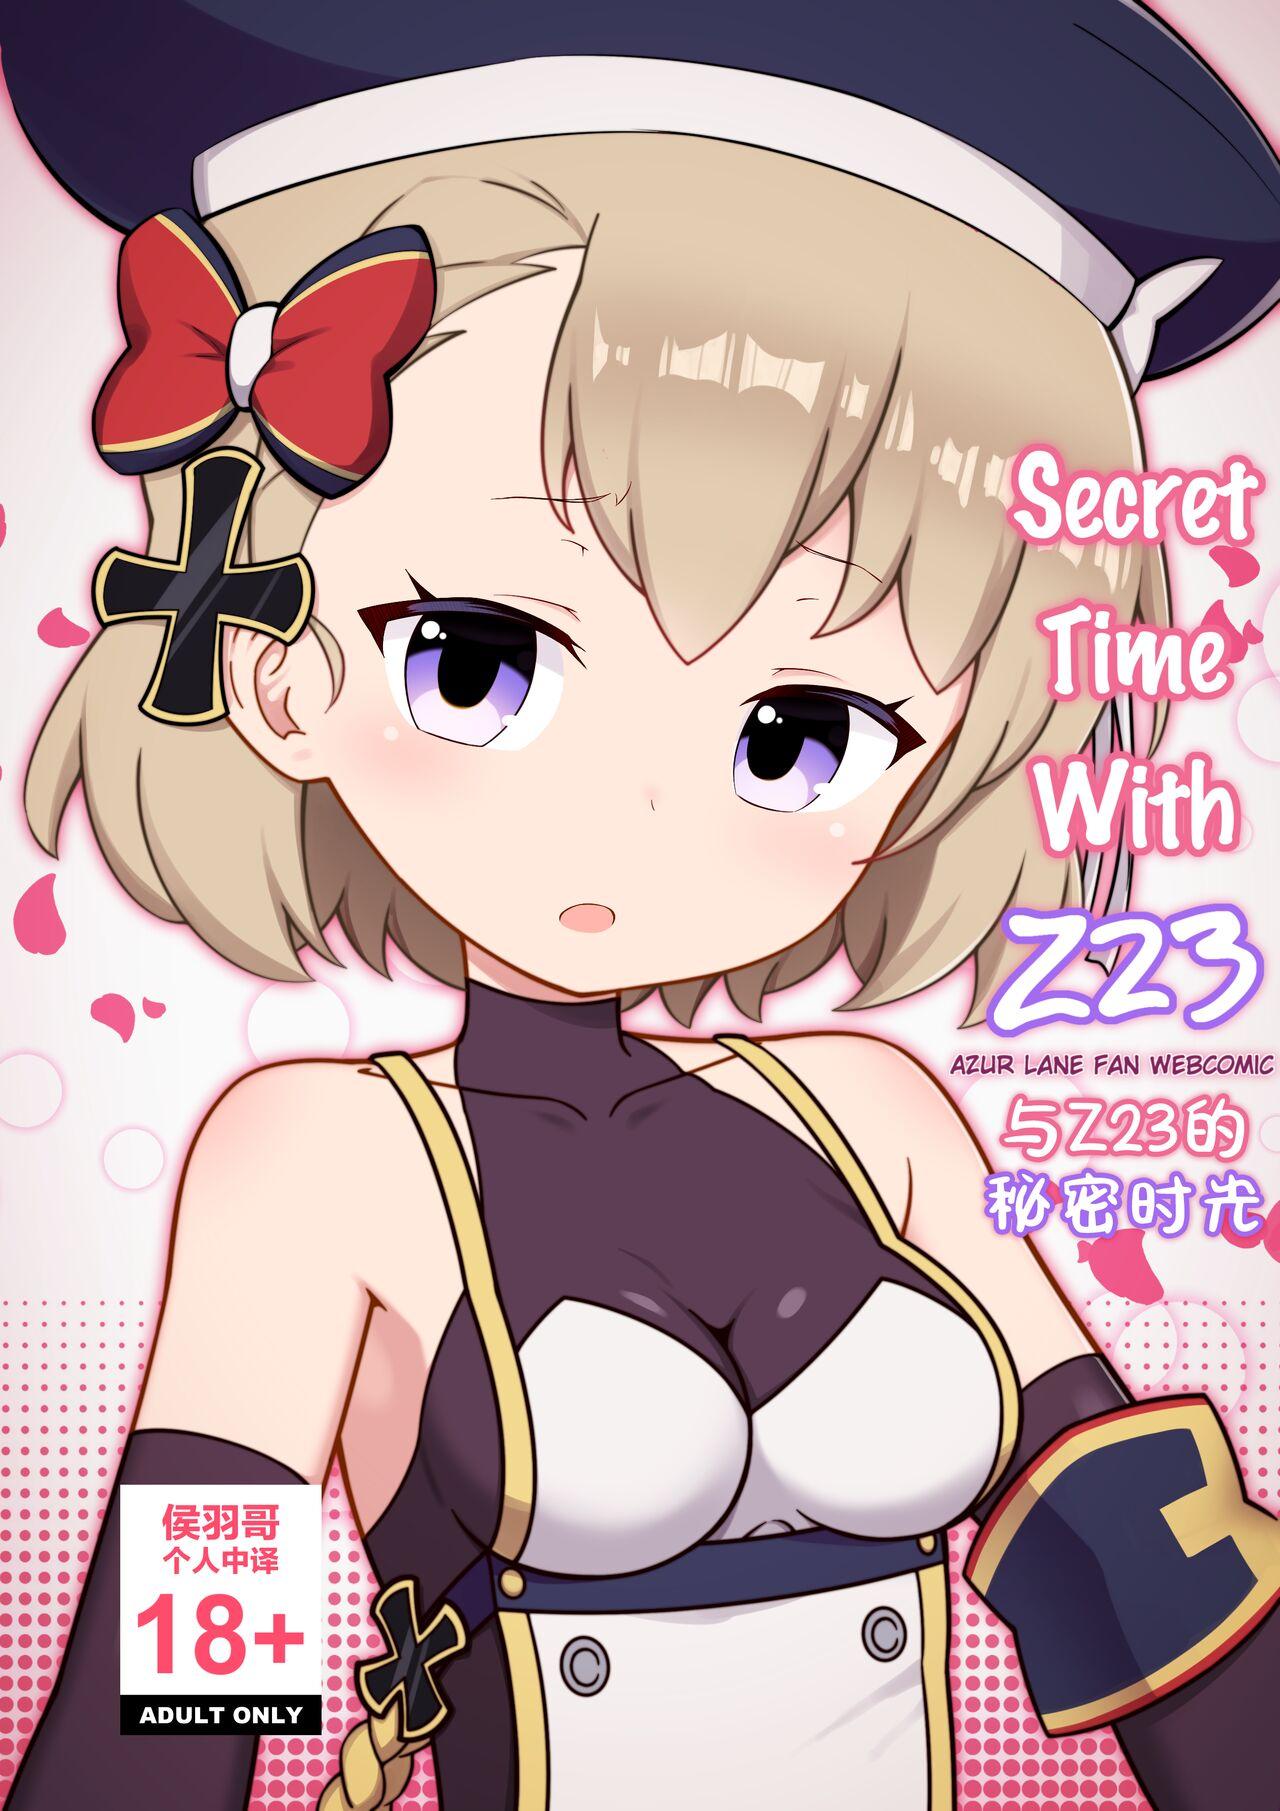 Taboo Secret Time With Z23 | 与Z23的秘密时光 - Azur lane Skype - Picture 1